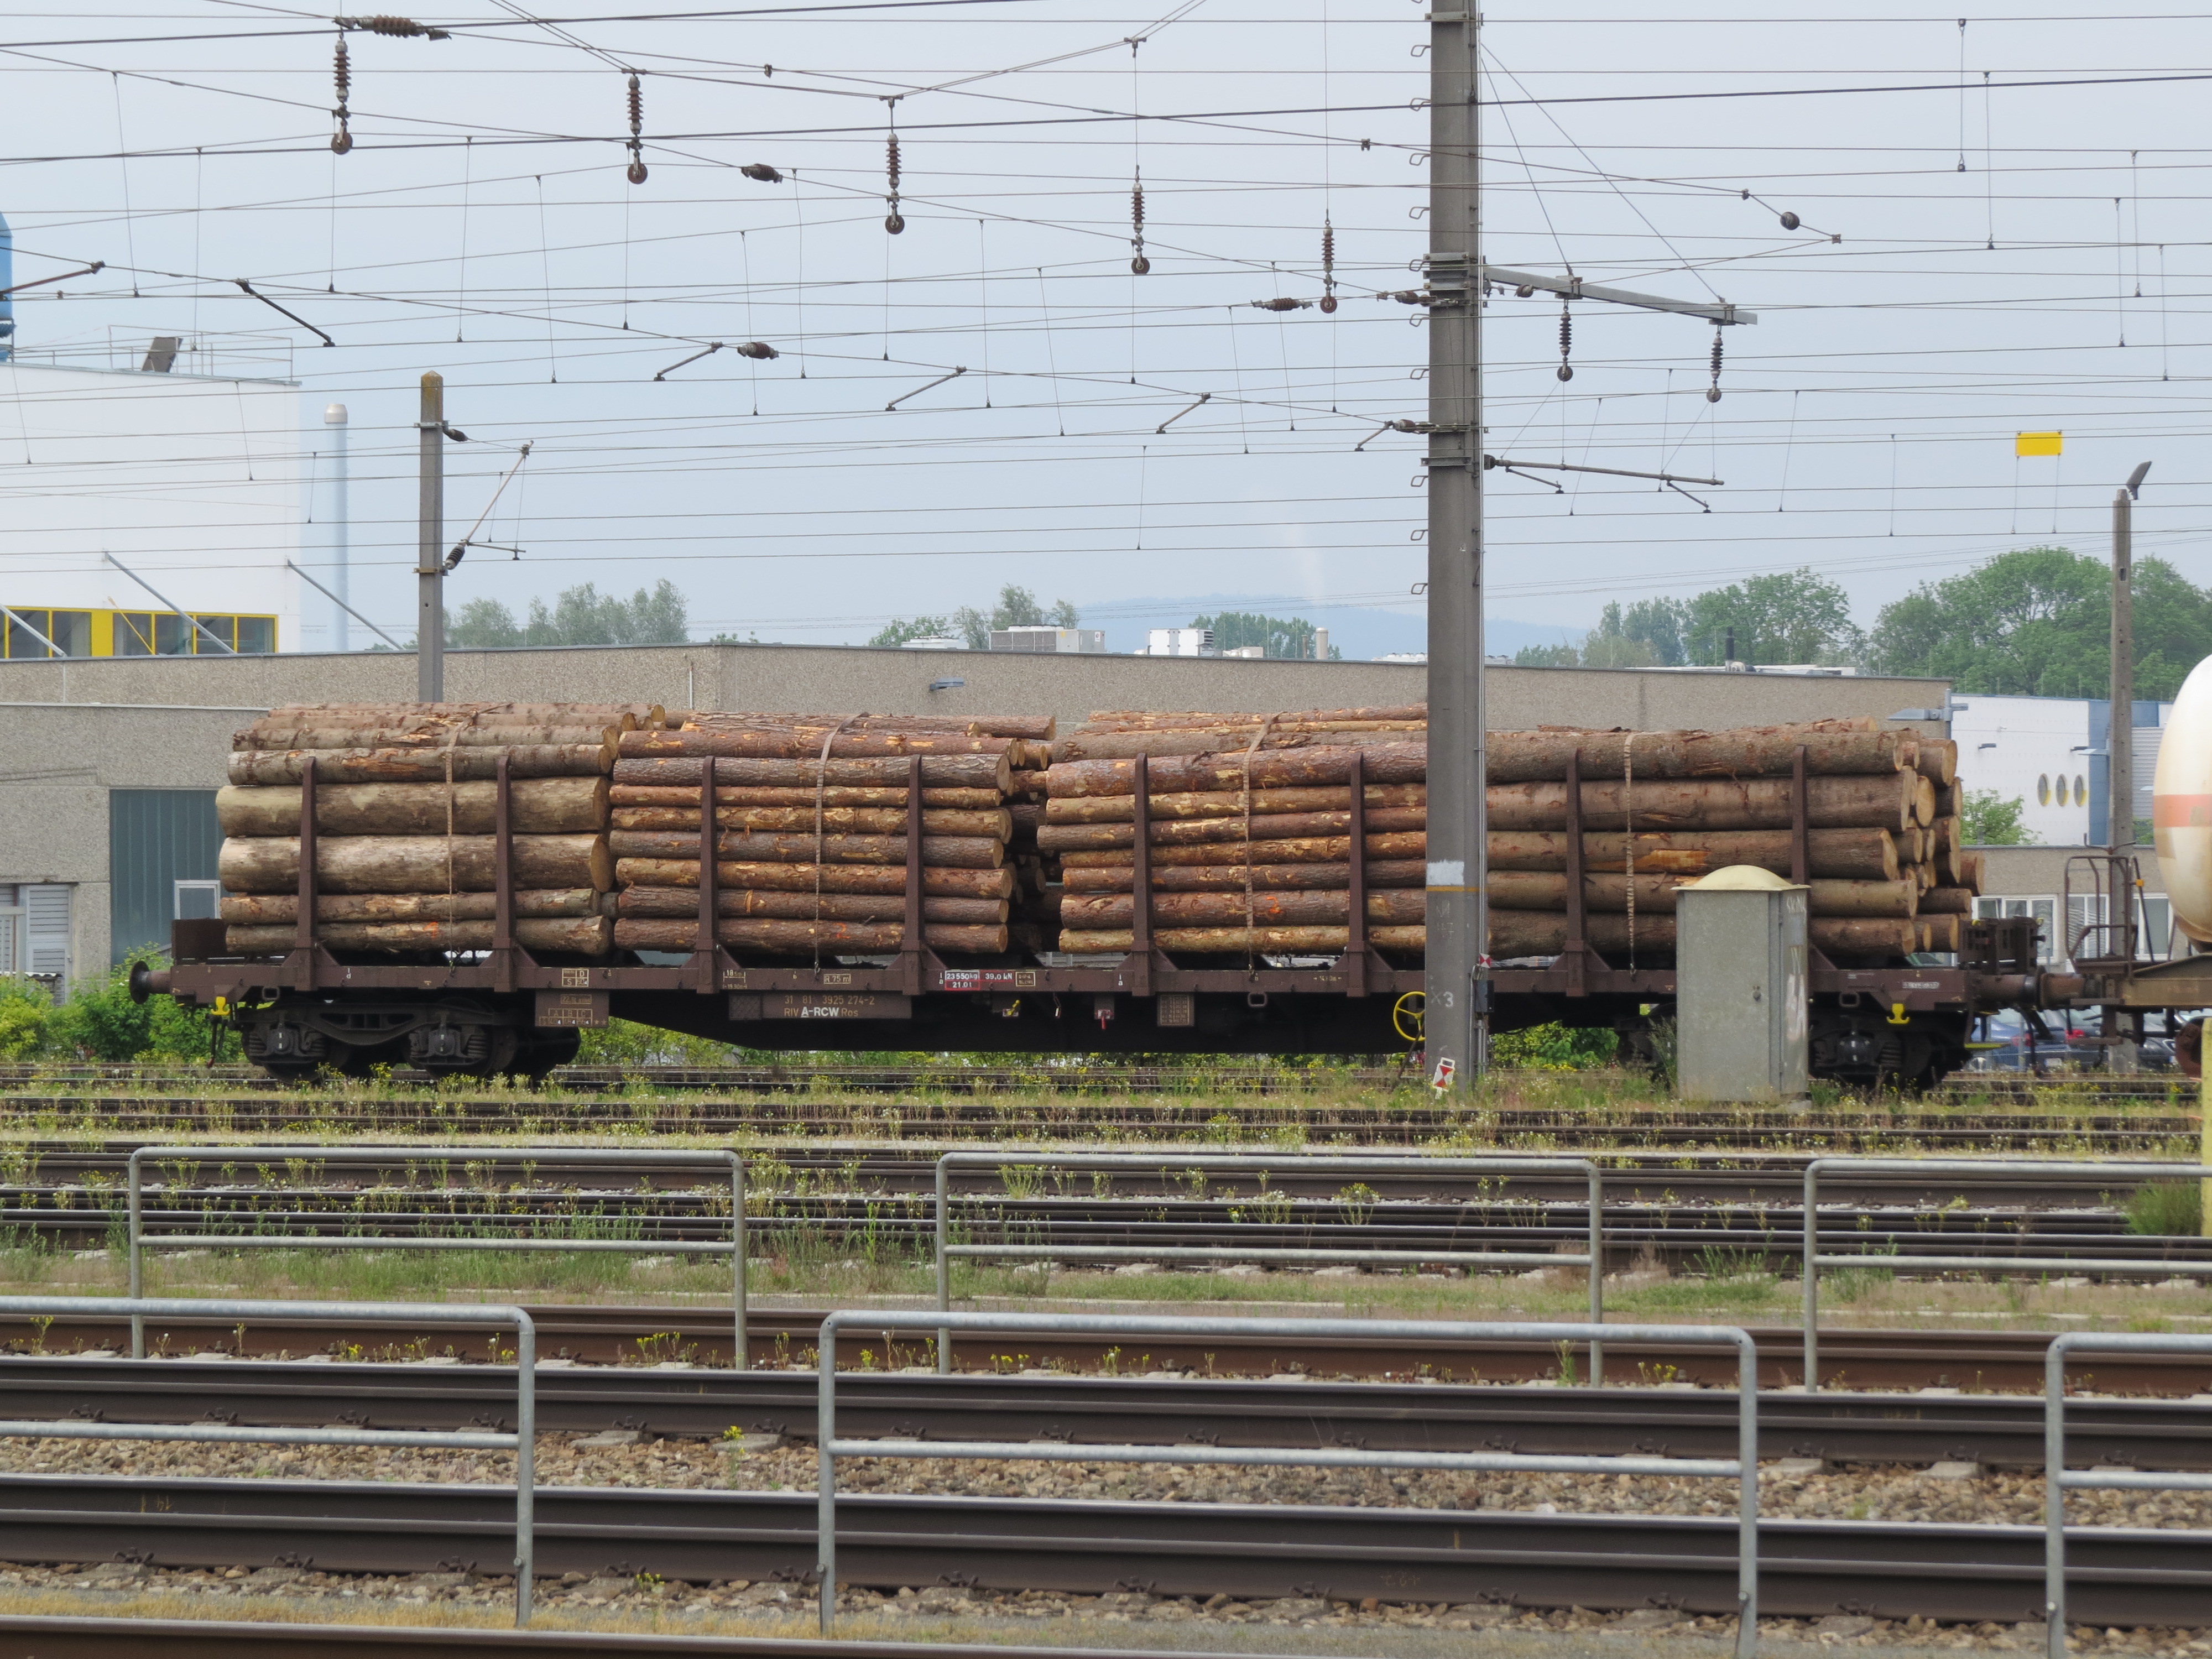 2018-05-04 (304) Freight wagon 31 81 3925 274-2 with wood at Bahnhof Enns